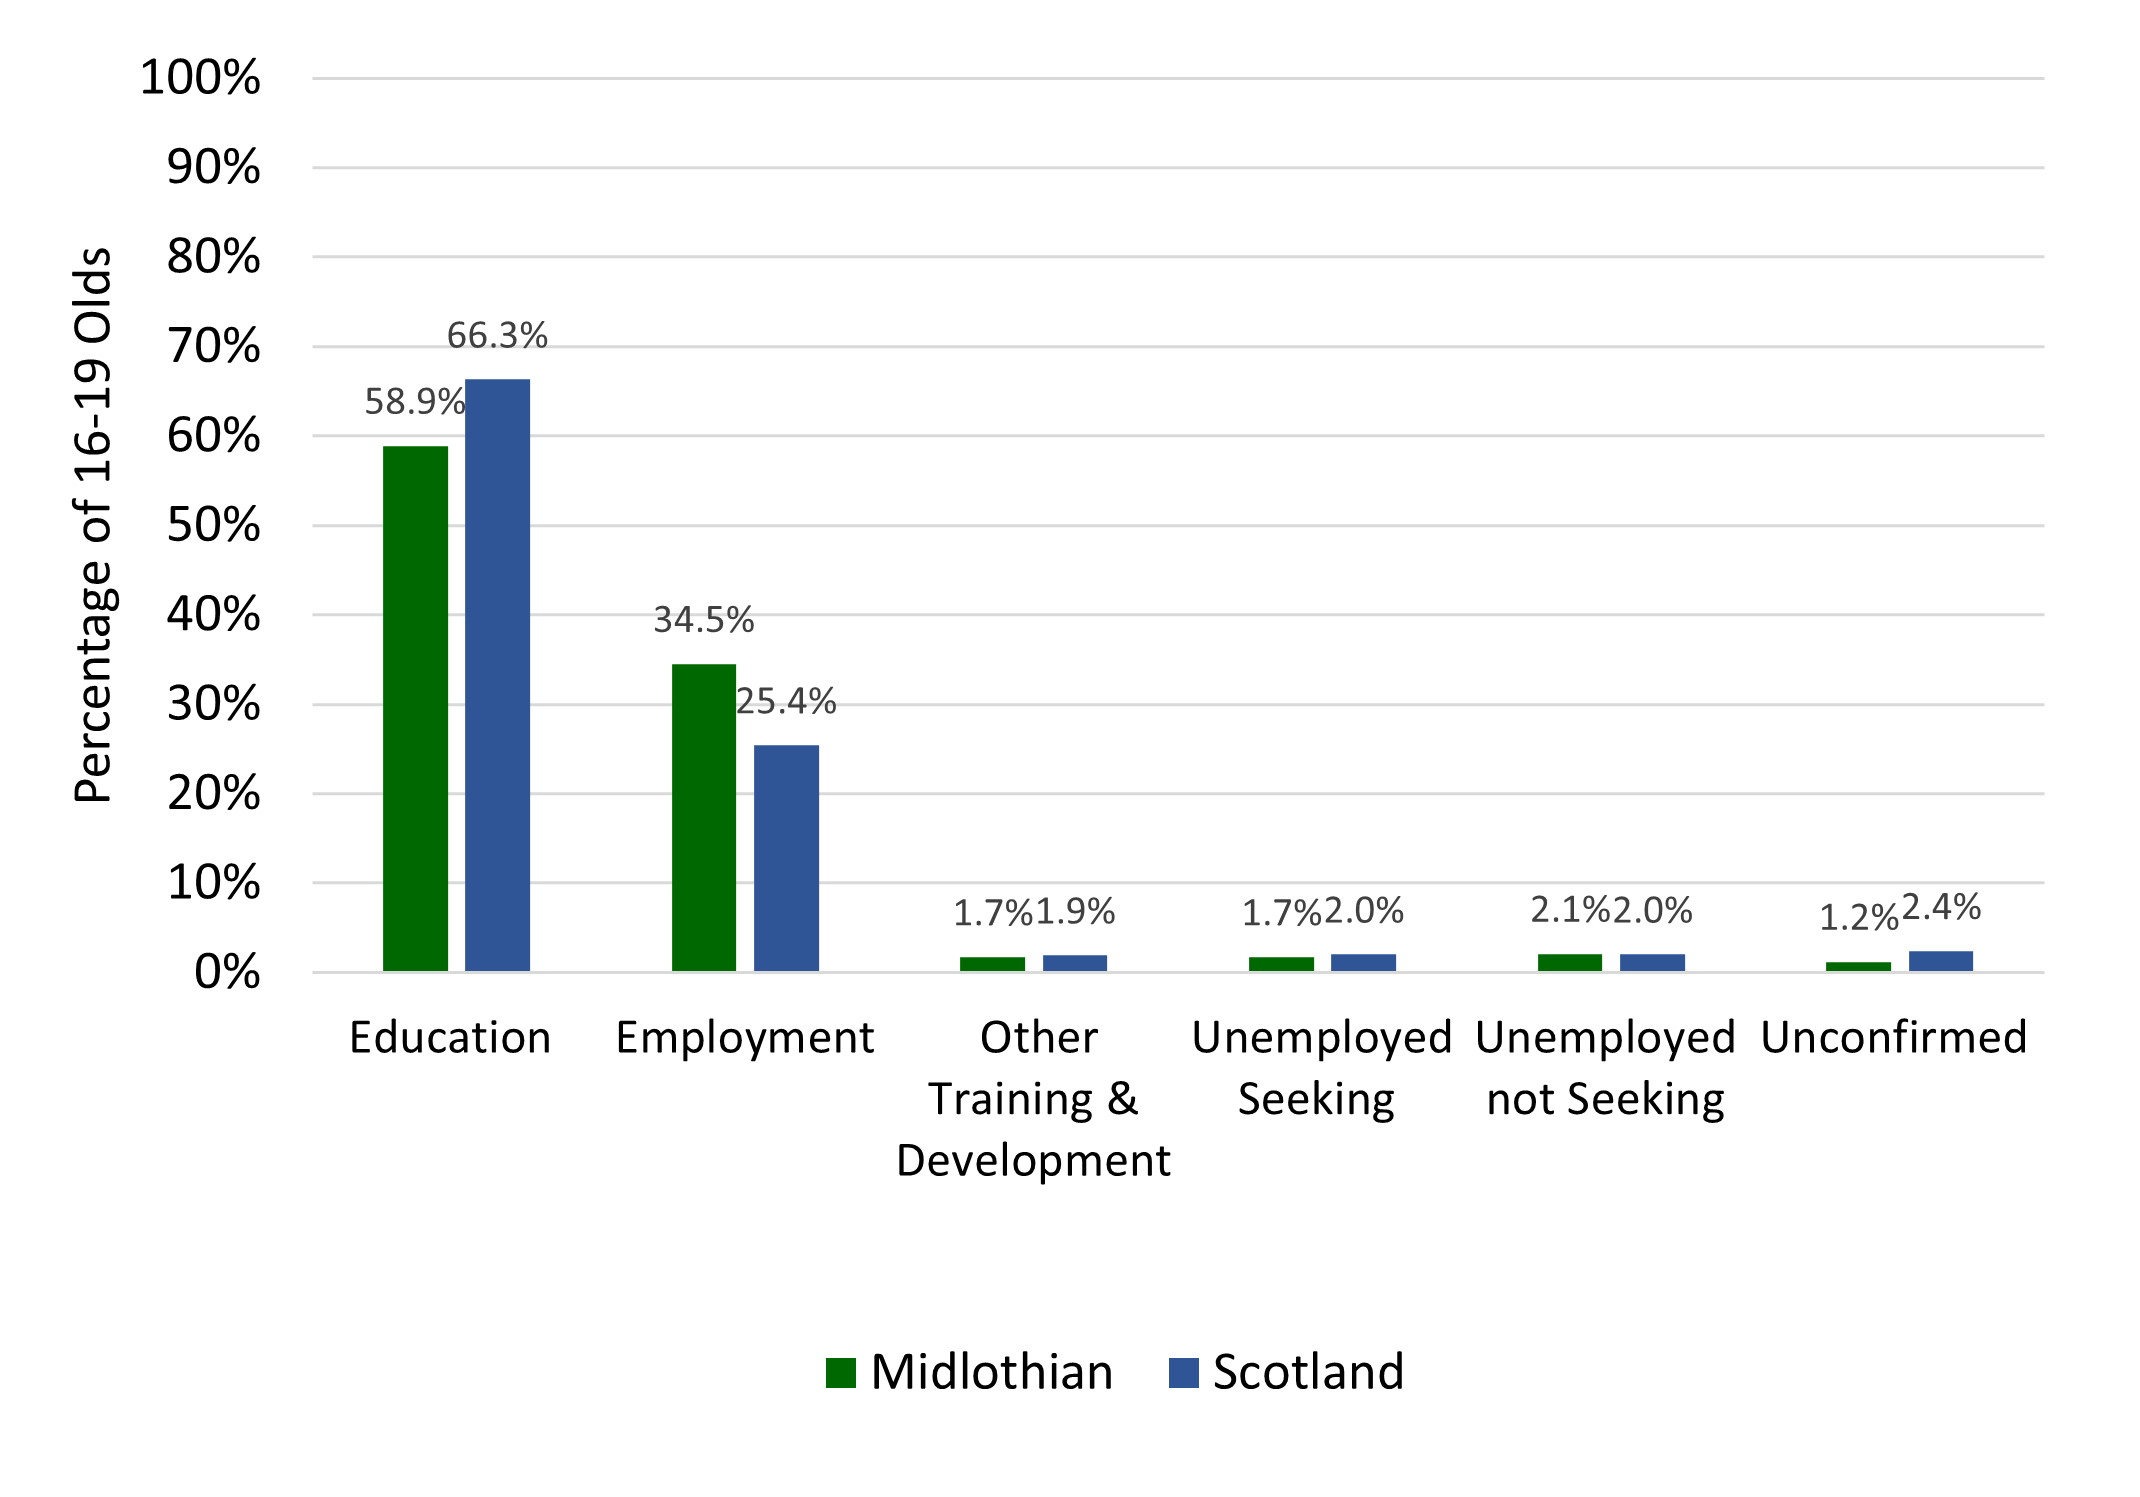 Almost 10% fewer 16-19 year old Midlothian male residents participated in education than the national average with almost 10% more finding employment.  Over 90% are in either education and employment account in both Midlothian and Scotland.